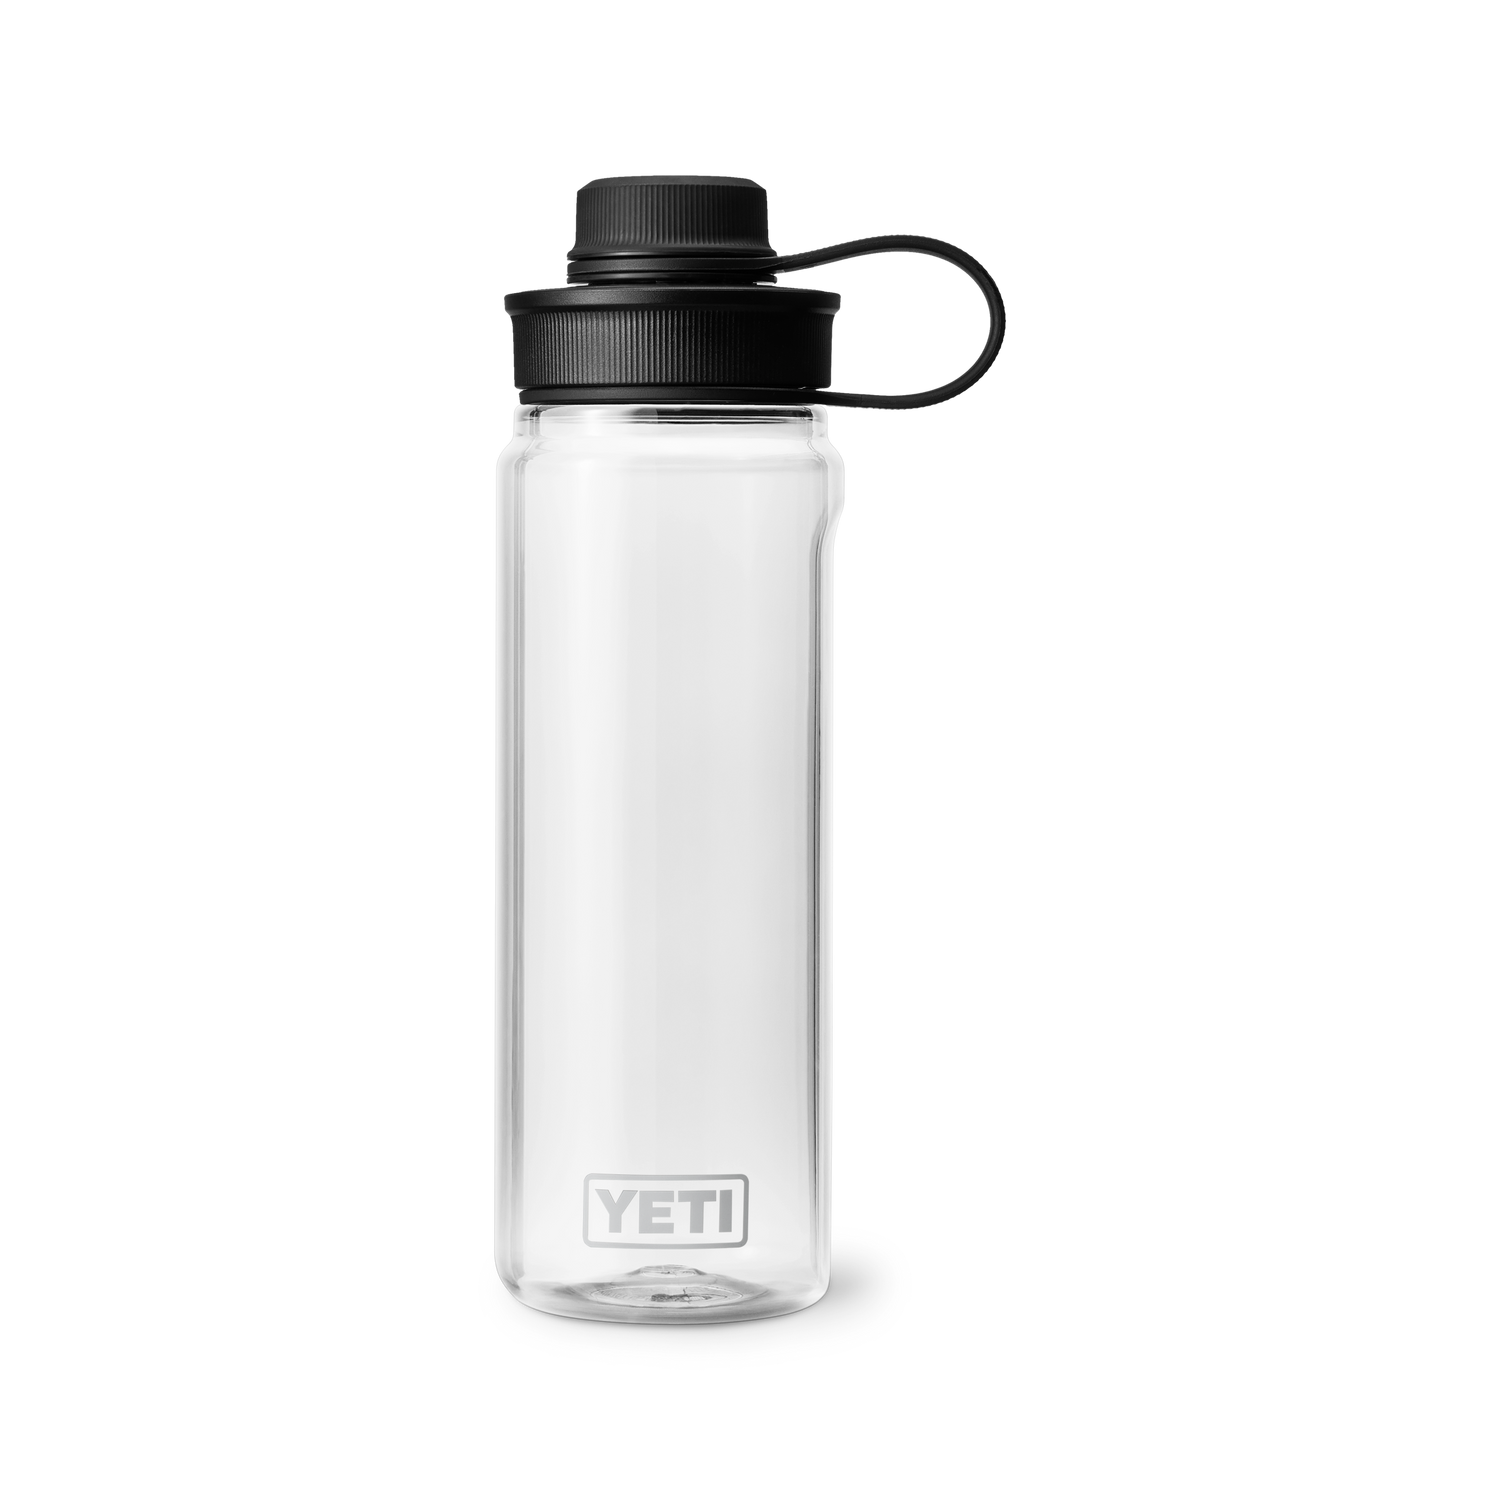 YETI_Wholesale_Drinkware_Yonder_Tether_Accs_750mL_Clear_Front_0771_B_2400x2400.png